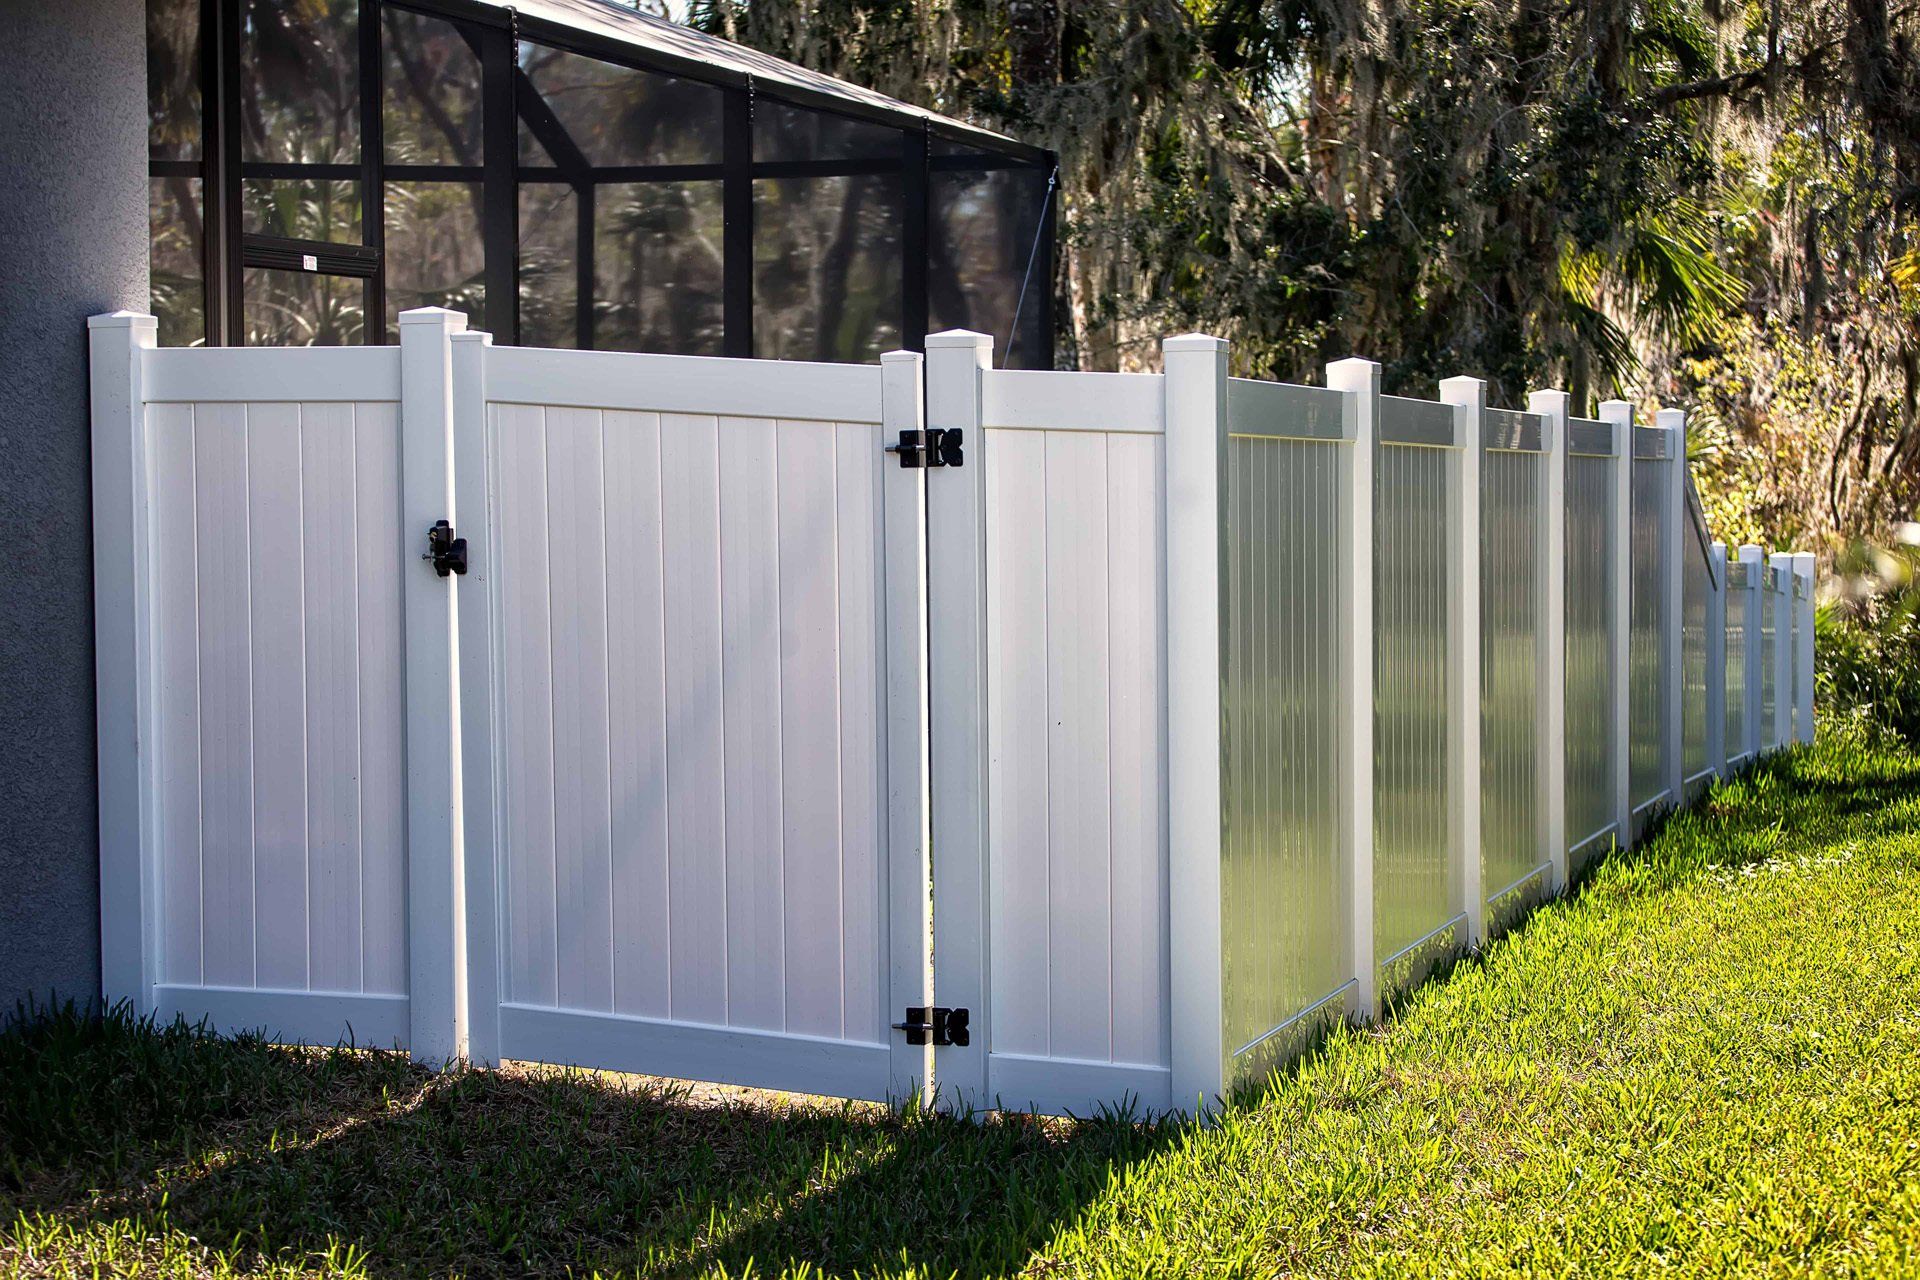 Aluminum fencing is a budget friendly solution